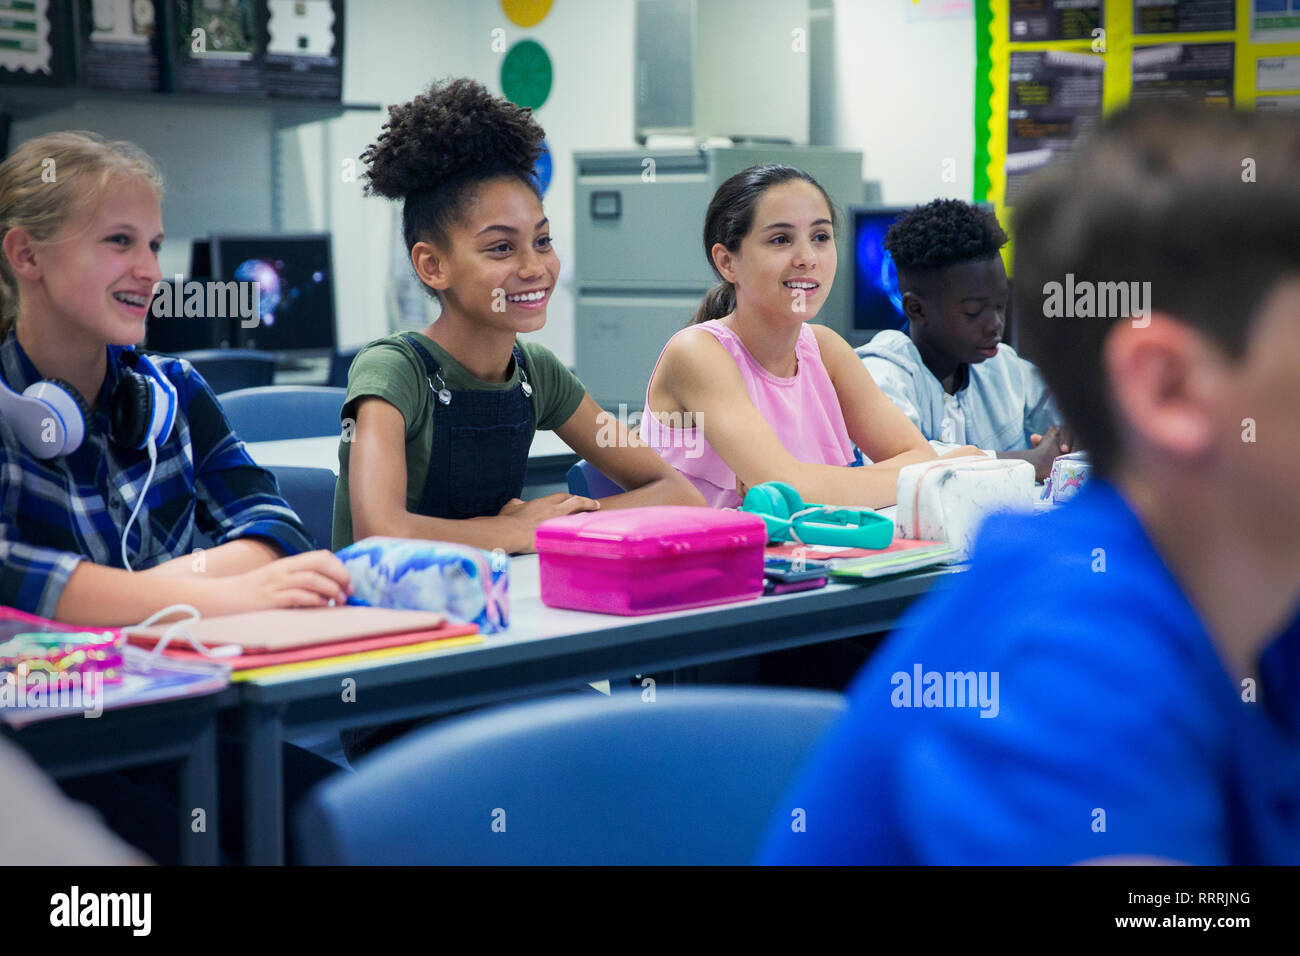 Smiling junior high school girl students at desk in classroom Stock Photo